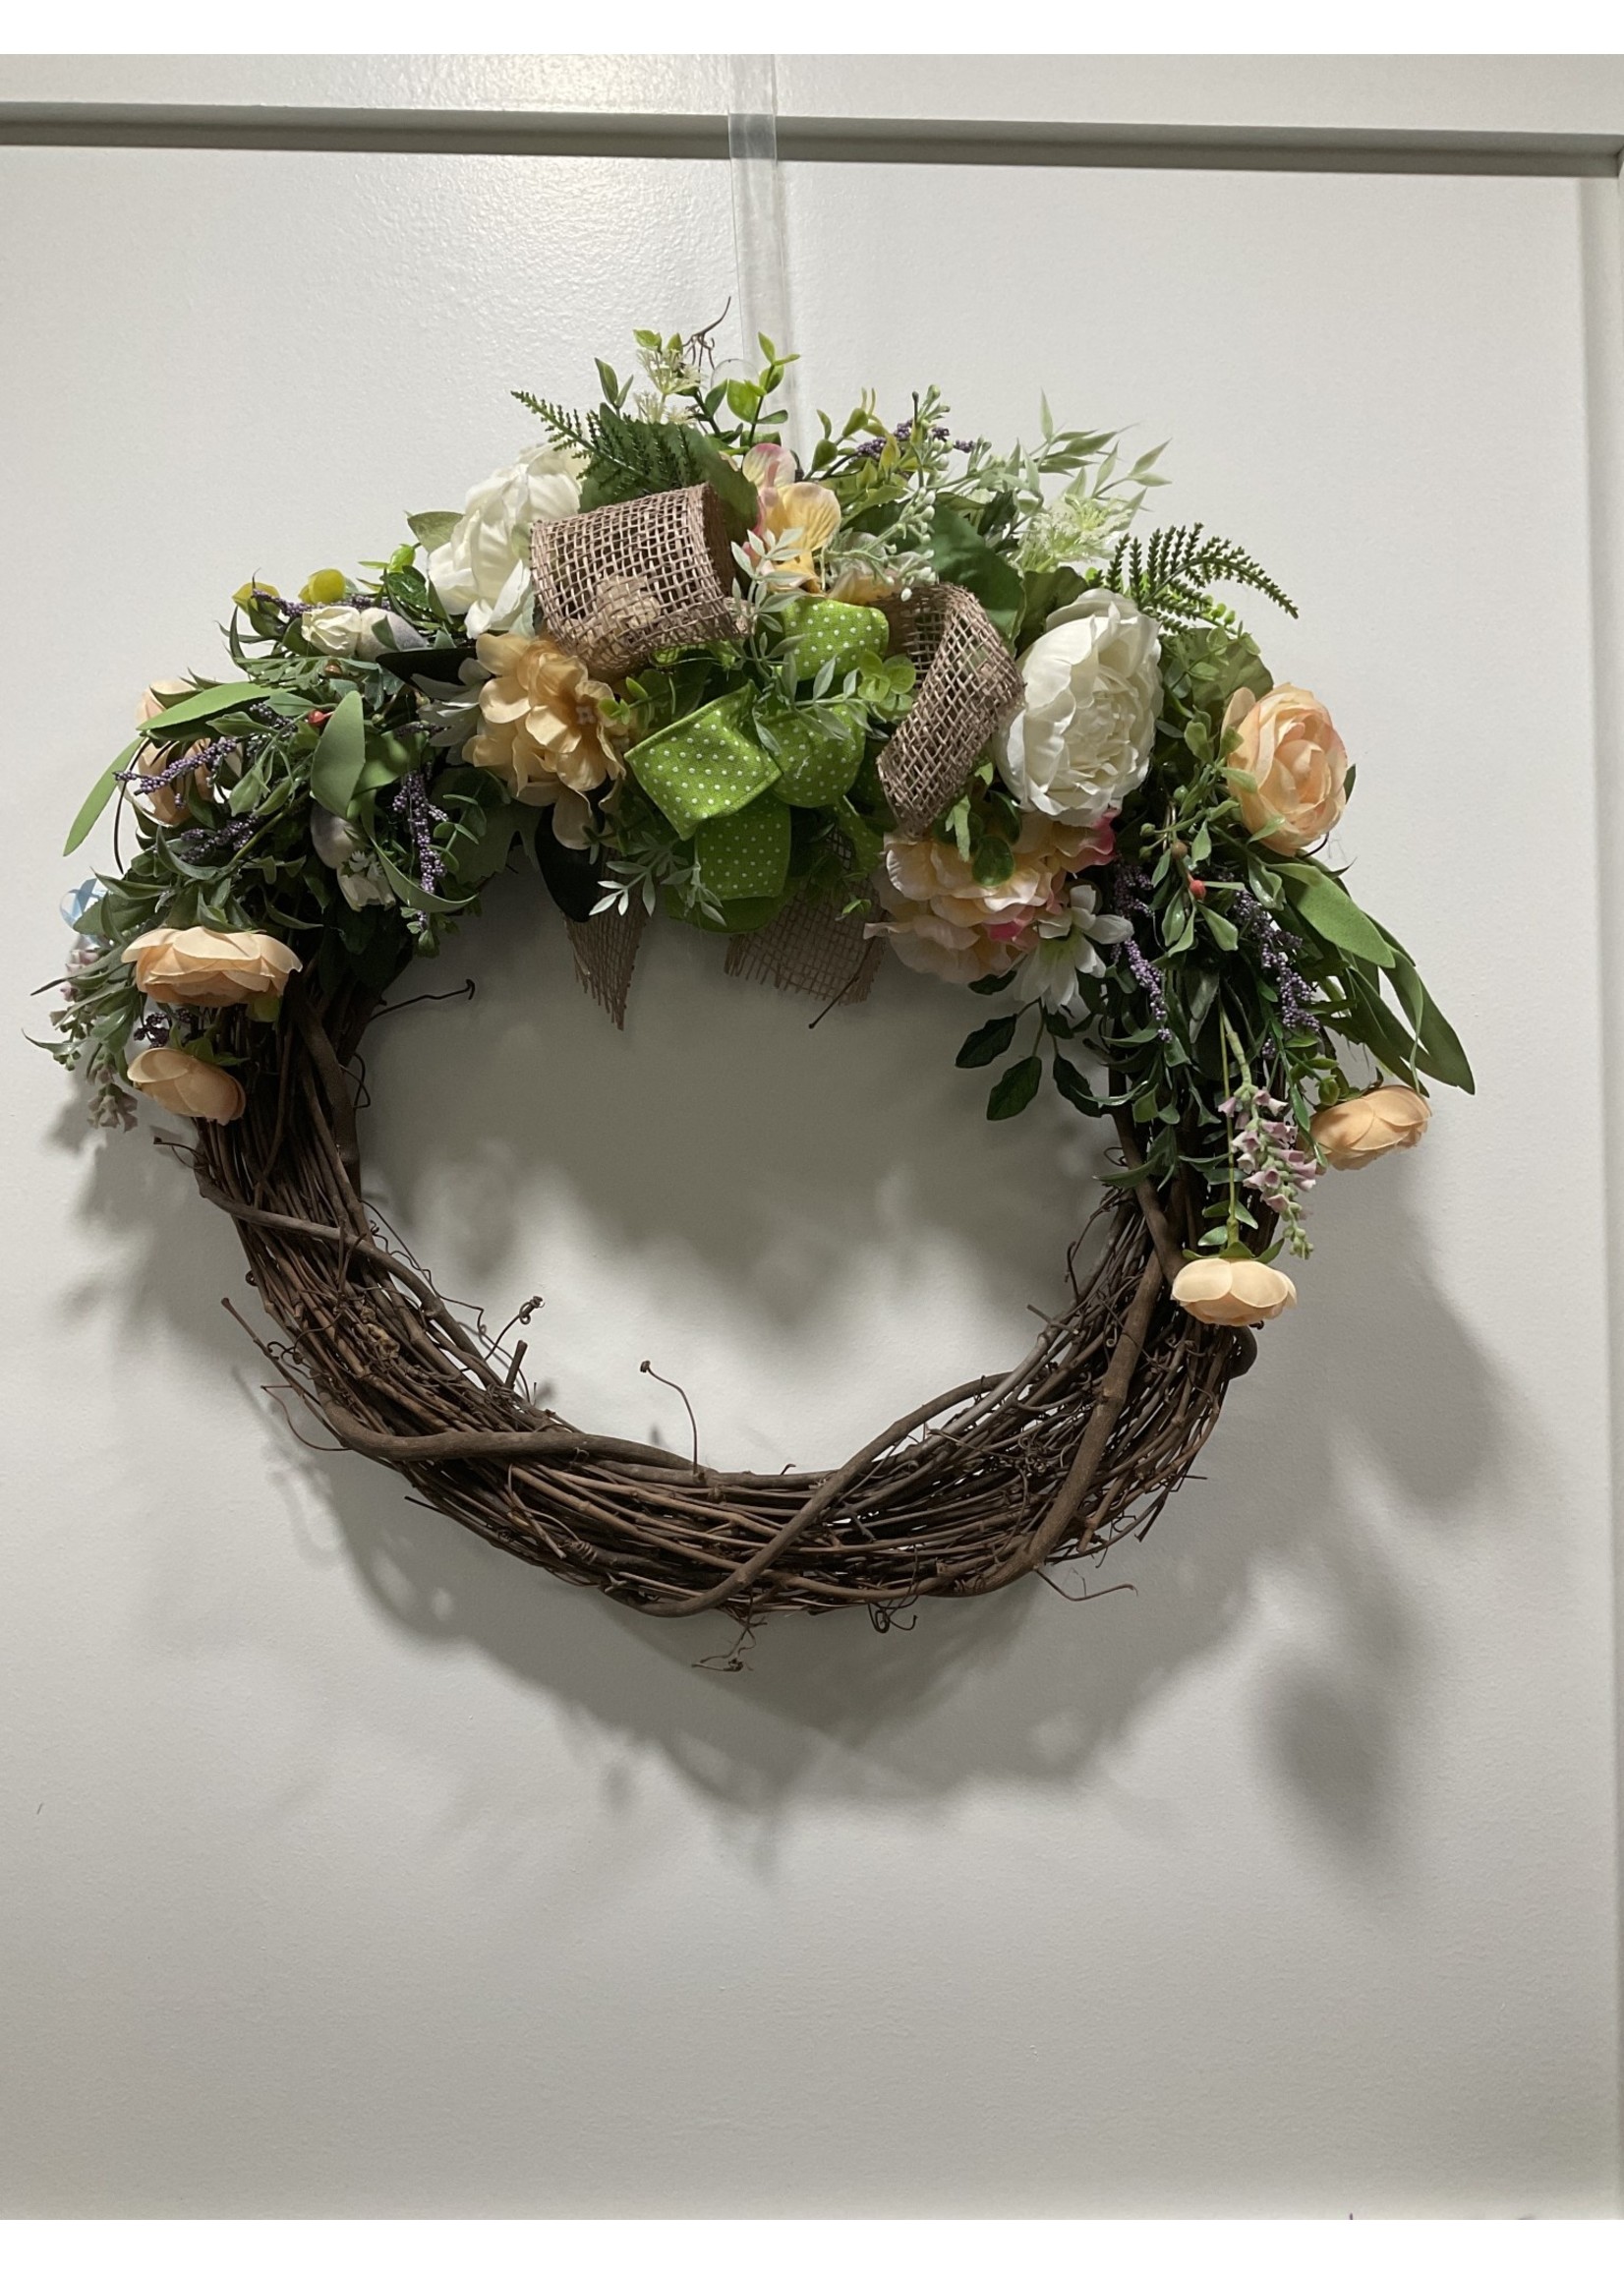 My New Favorite Thing Wreath Grapevine 18 in-Peach and White Flowers w/Burlap and Green Dotted Ribbon